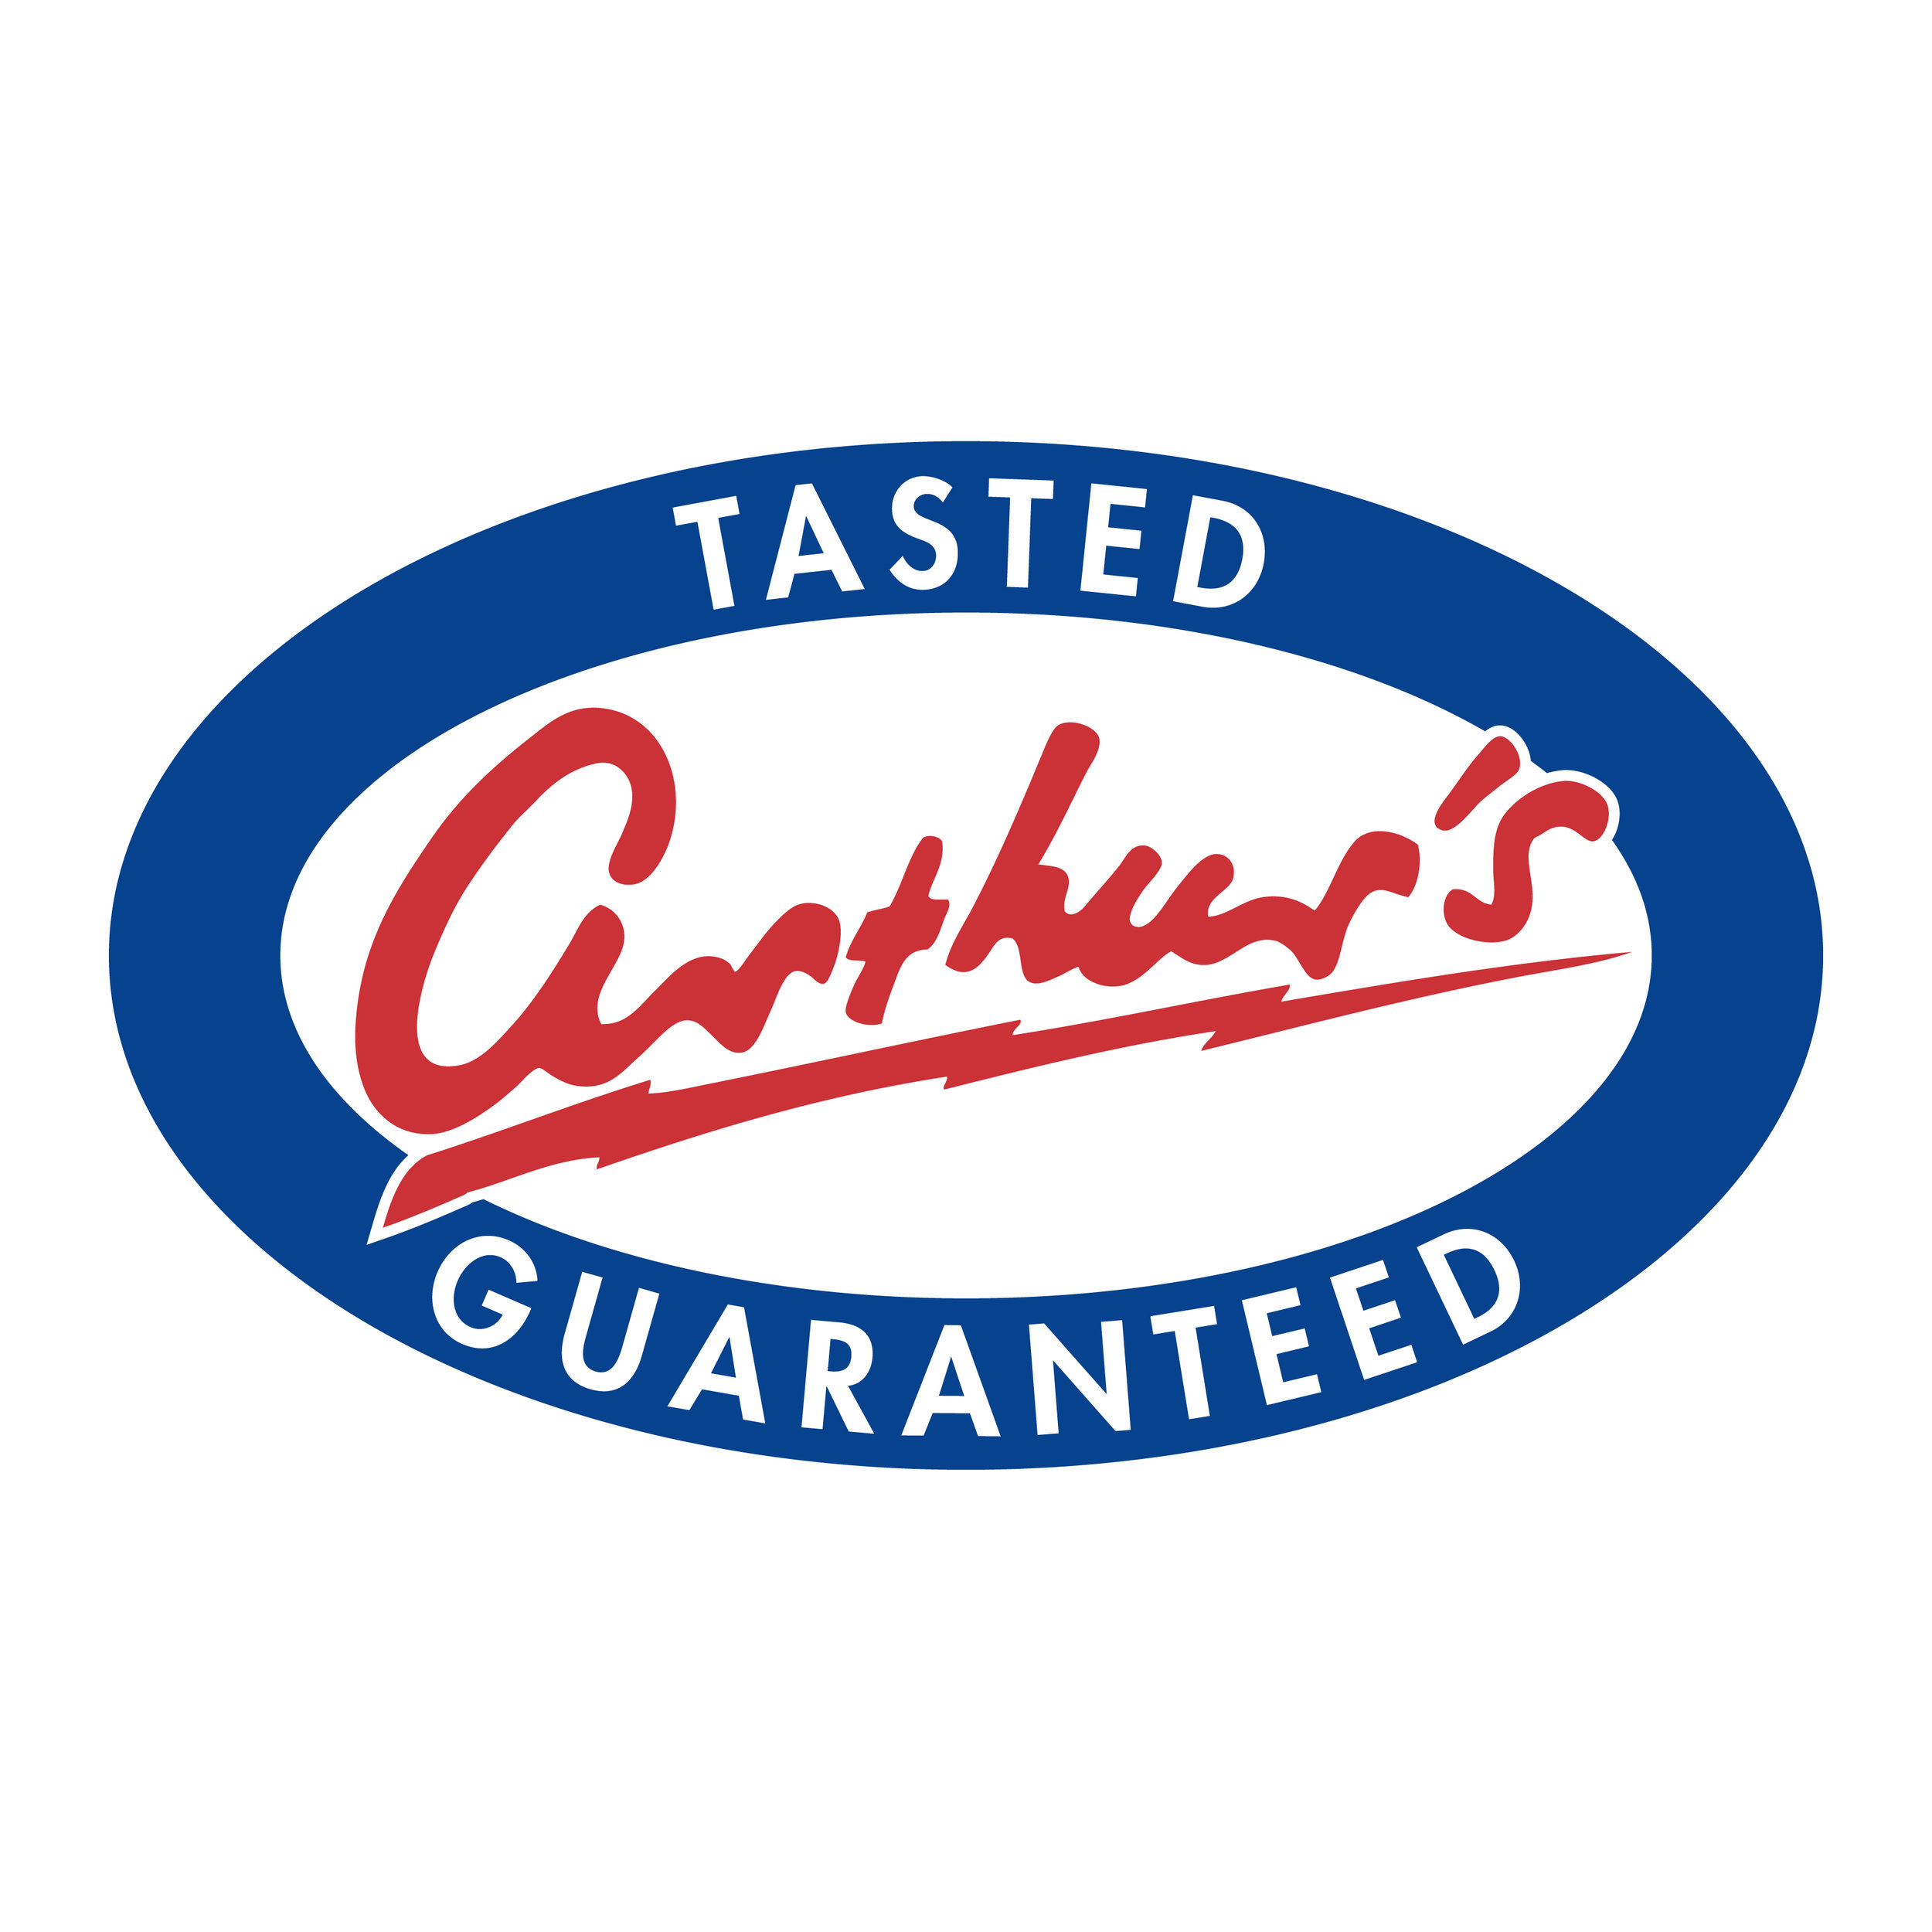  Arthur’s “Tasted Guaranteed” logo and label  Branding creative and design by Chuck Mitchell 